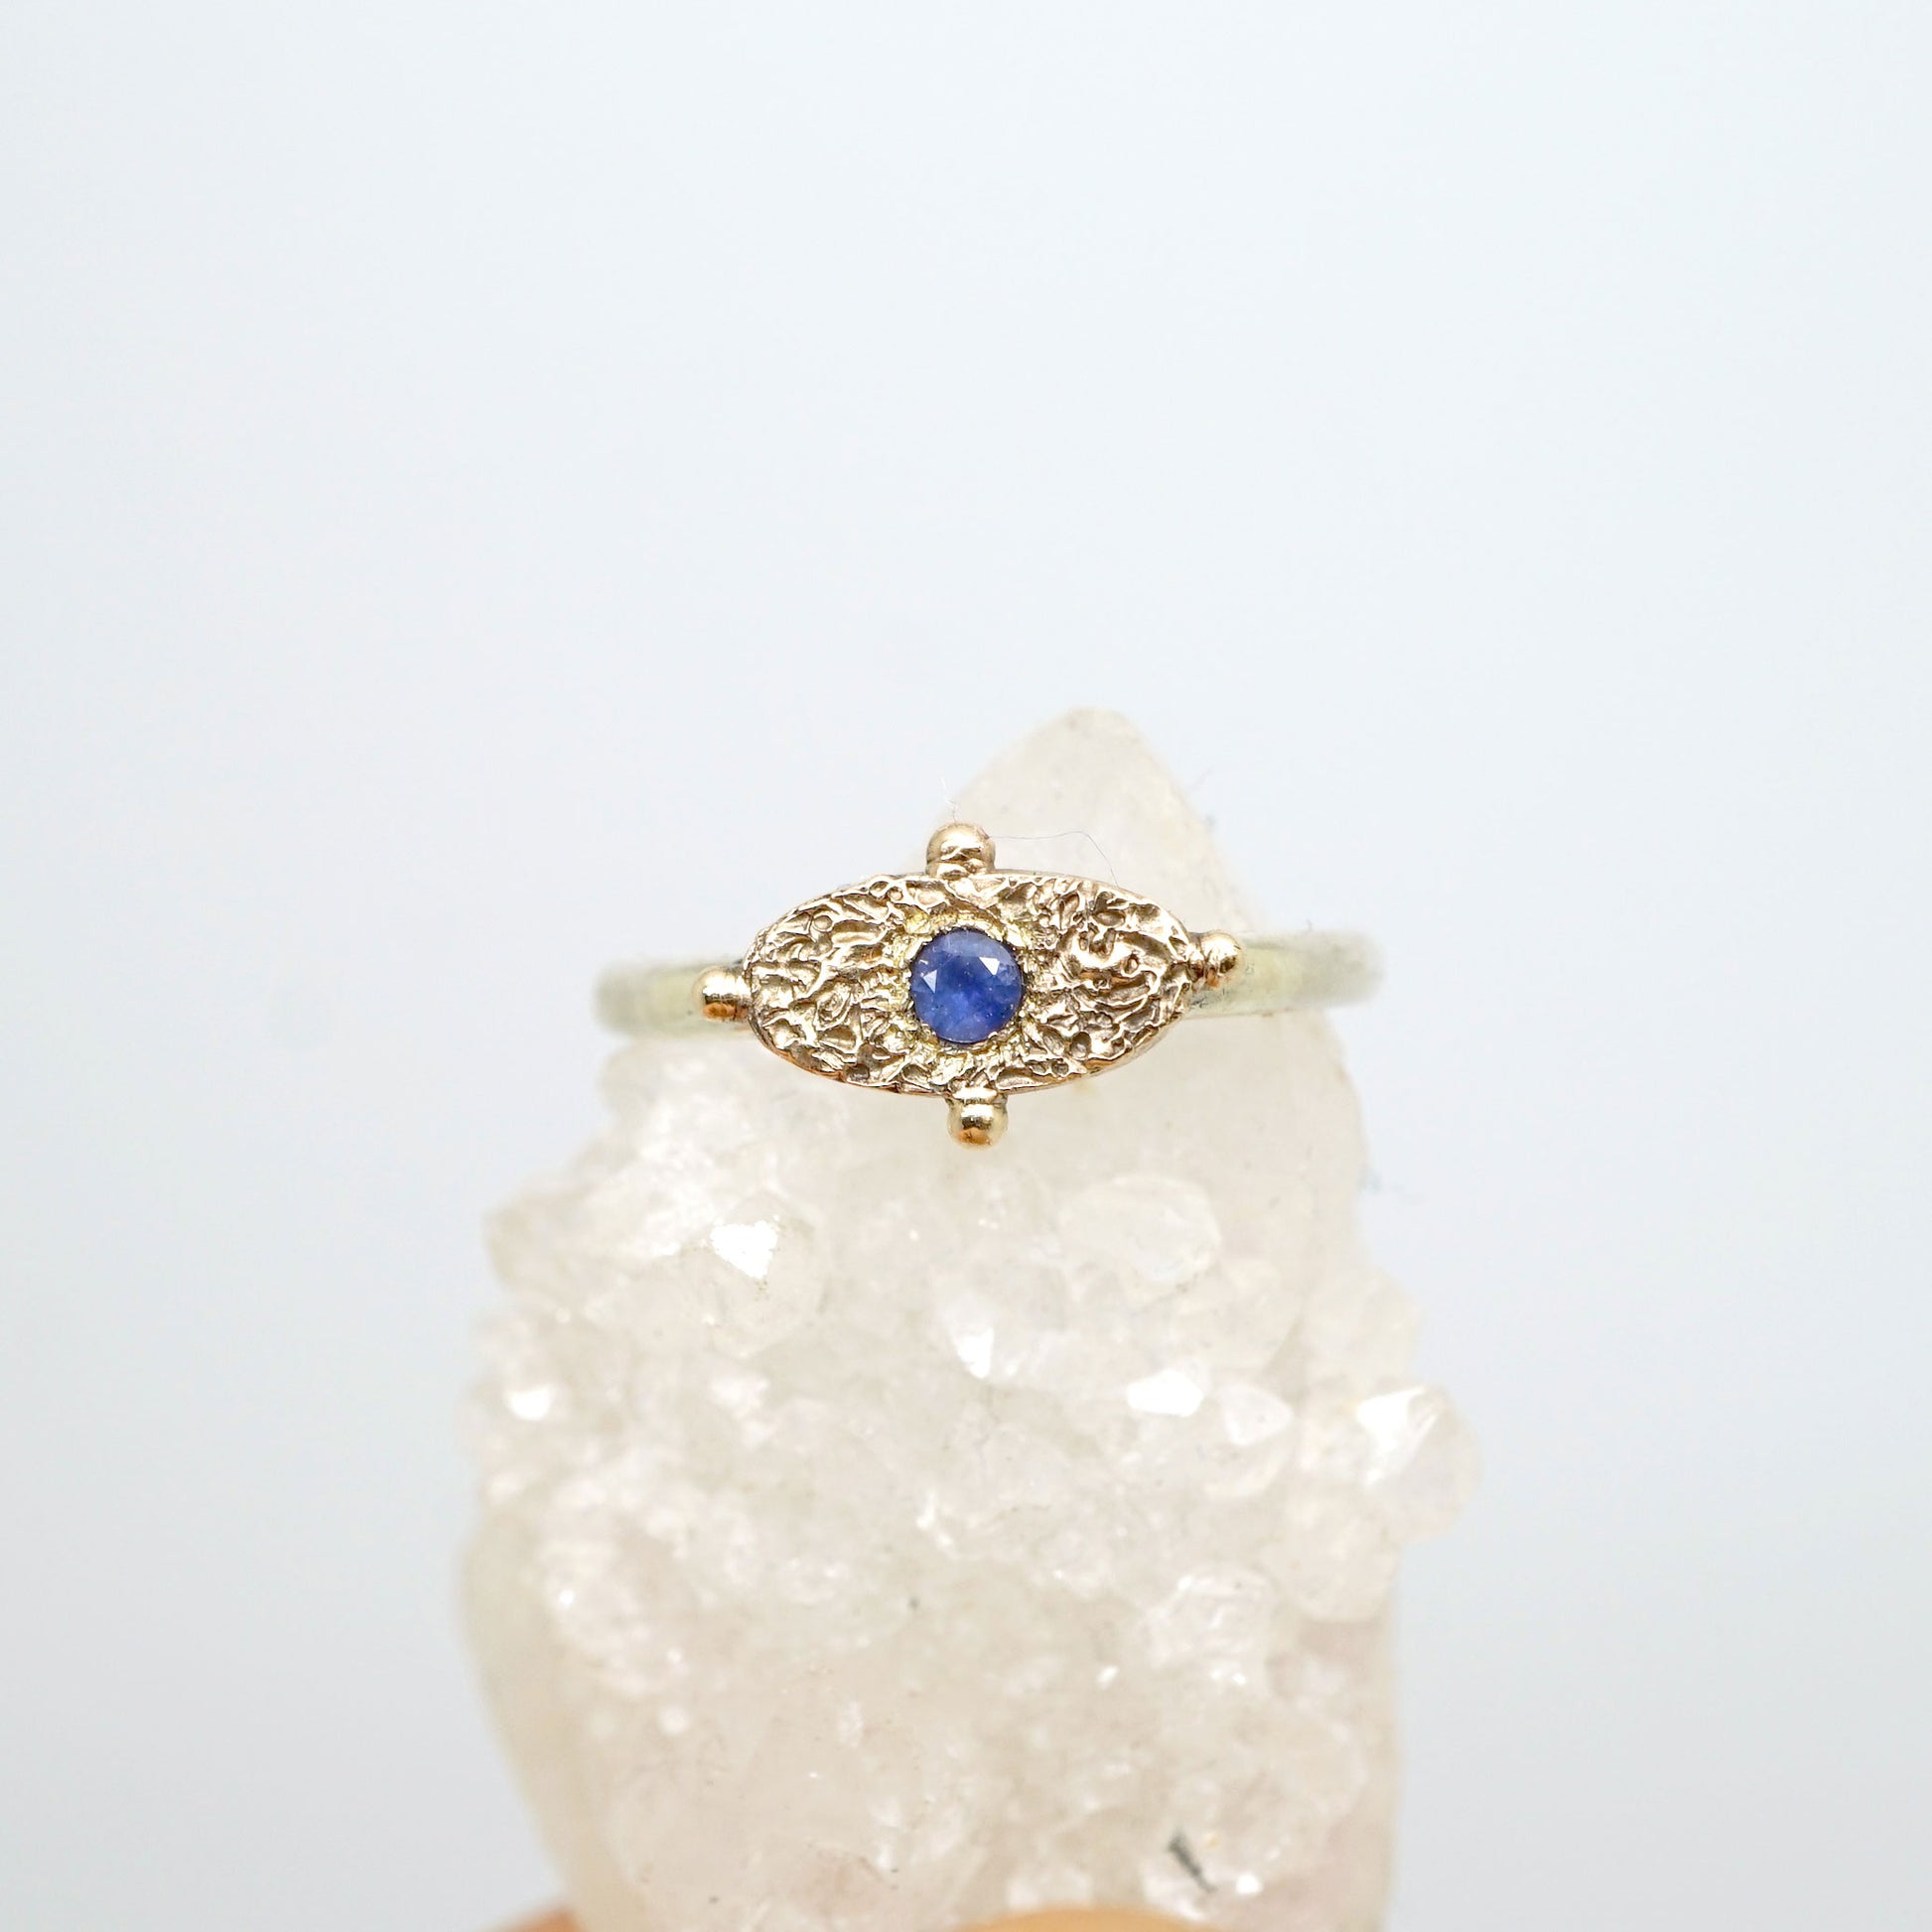 Textured signet ring with blue sapphire